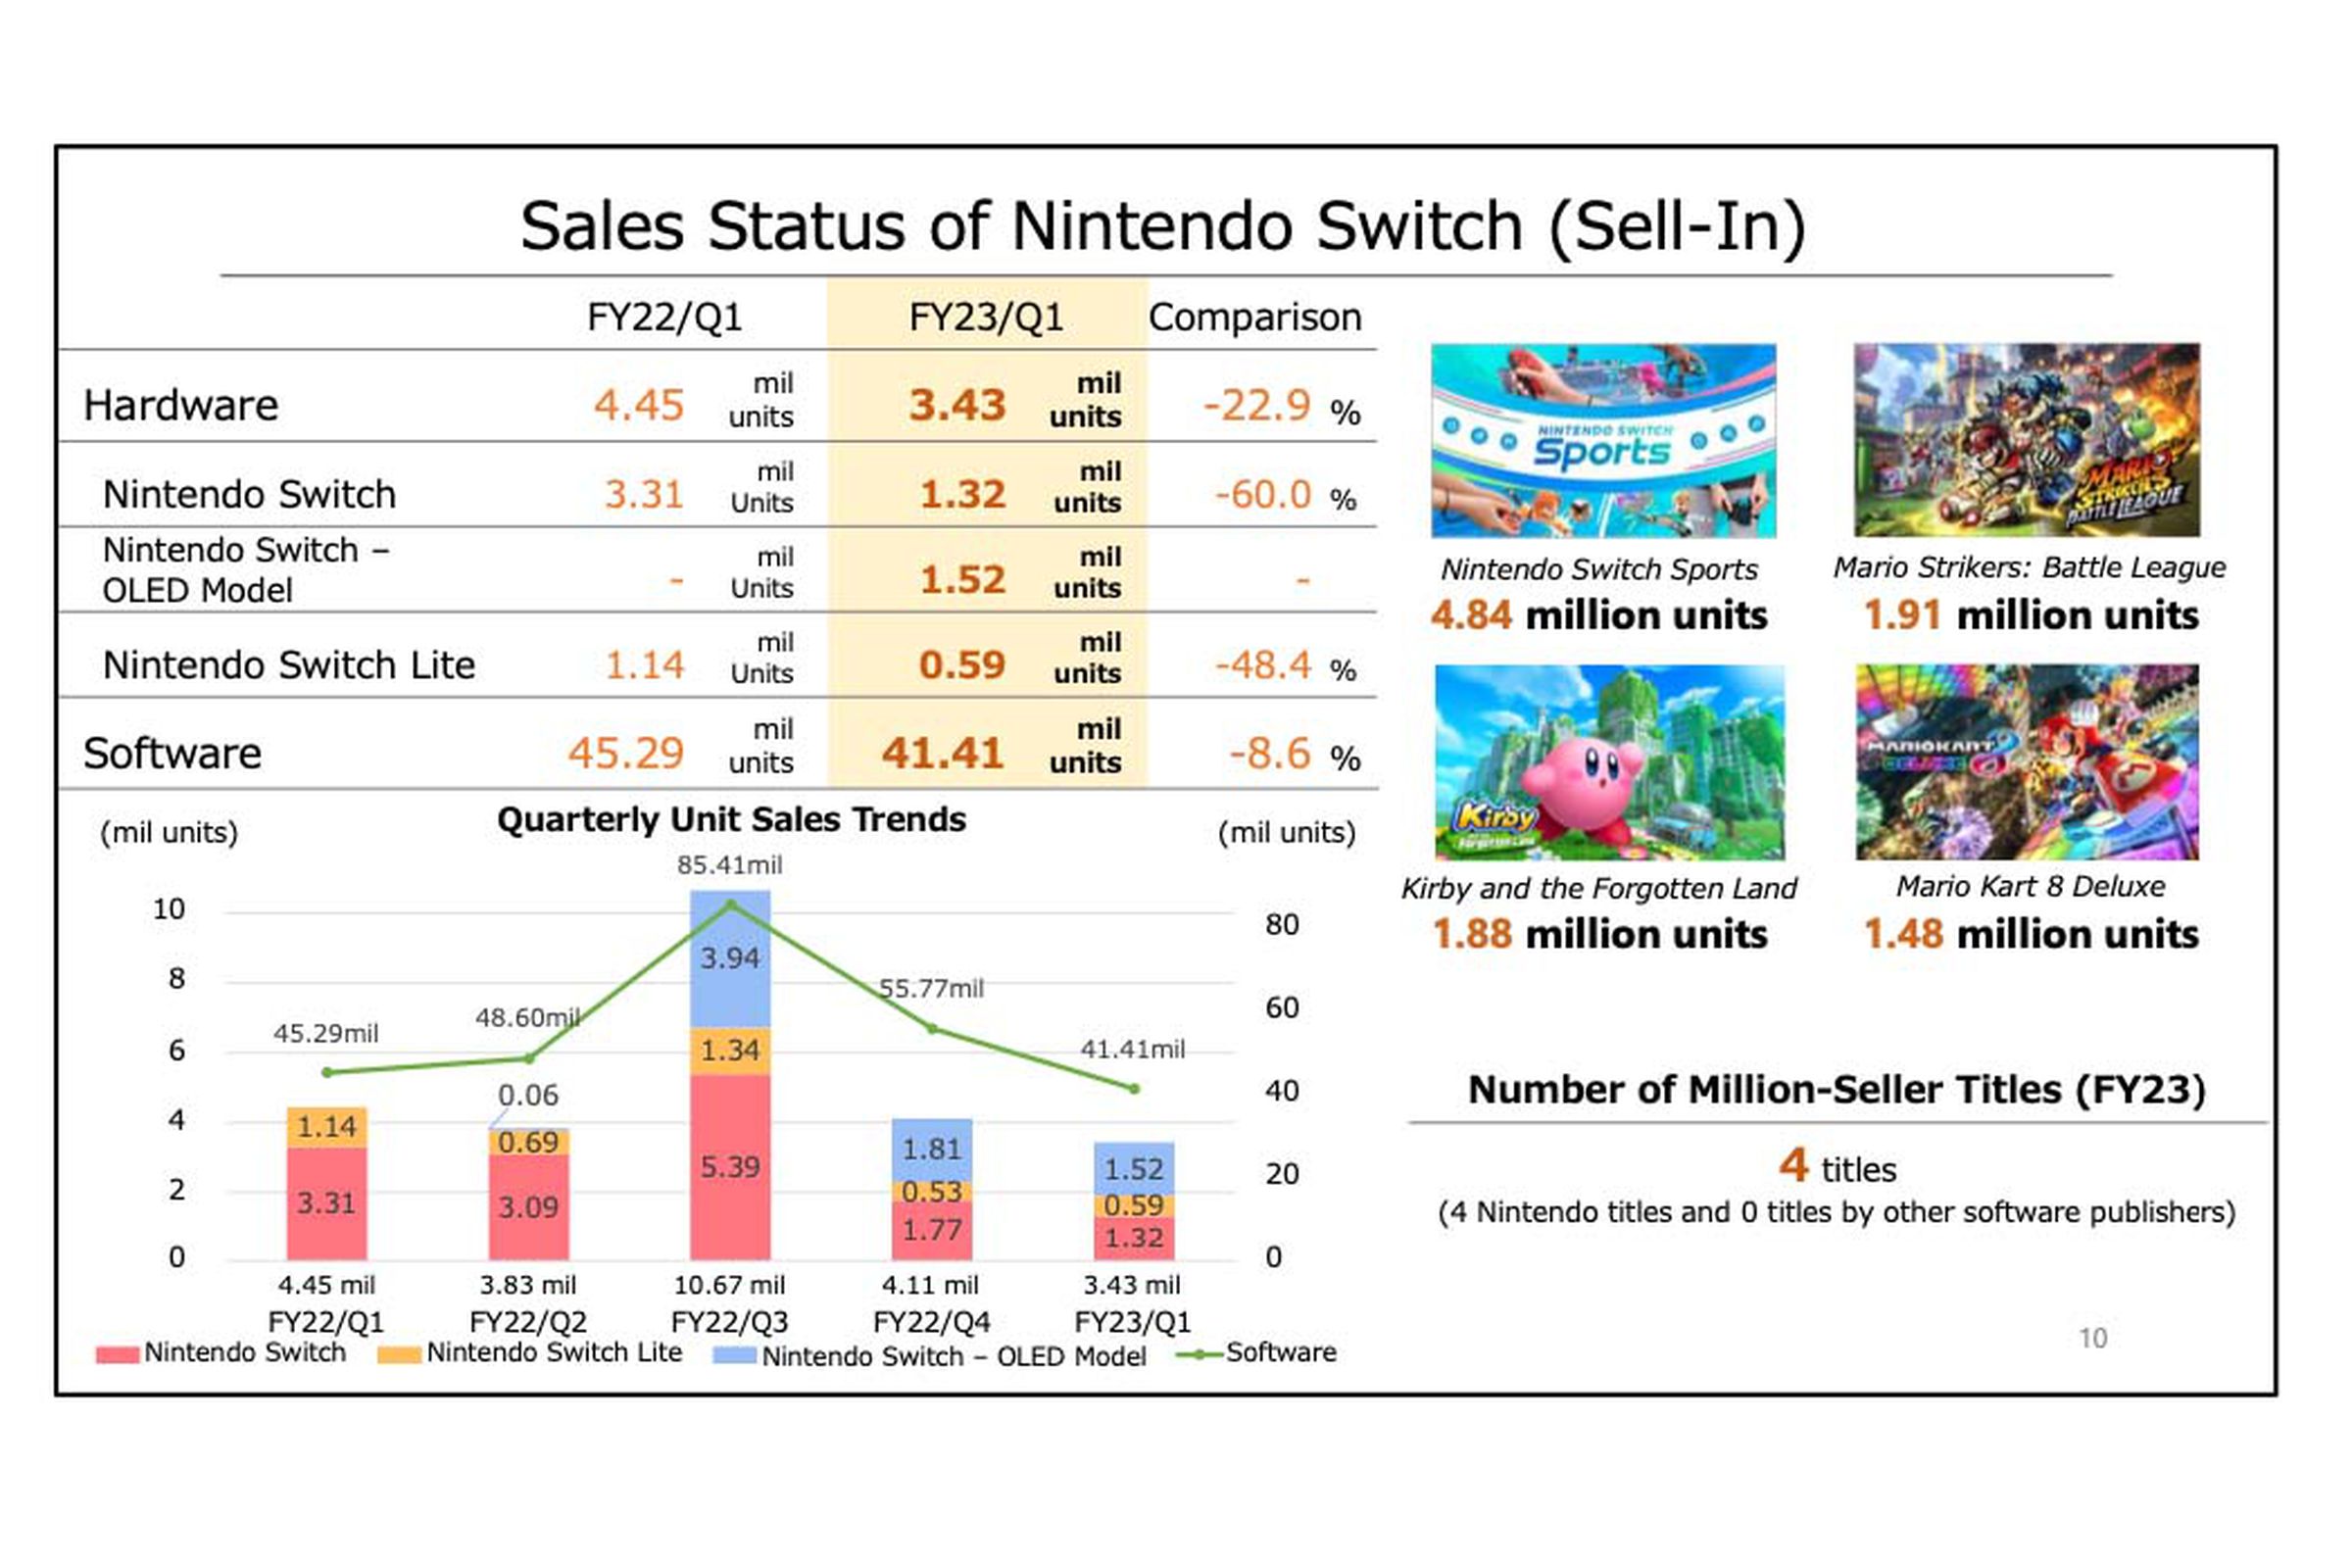 Console sales were down overall compared to last year.